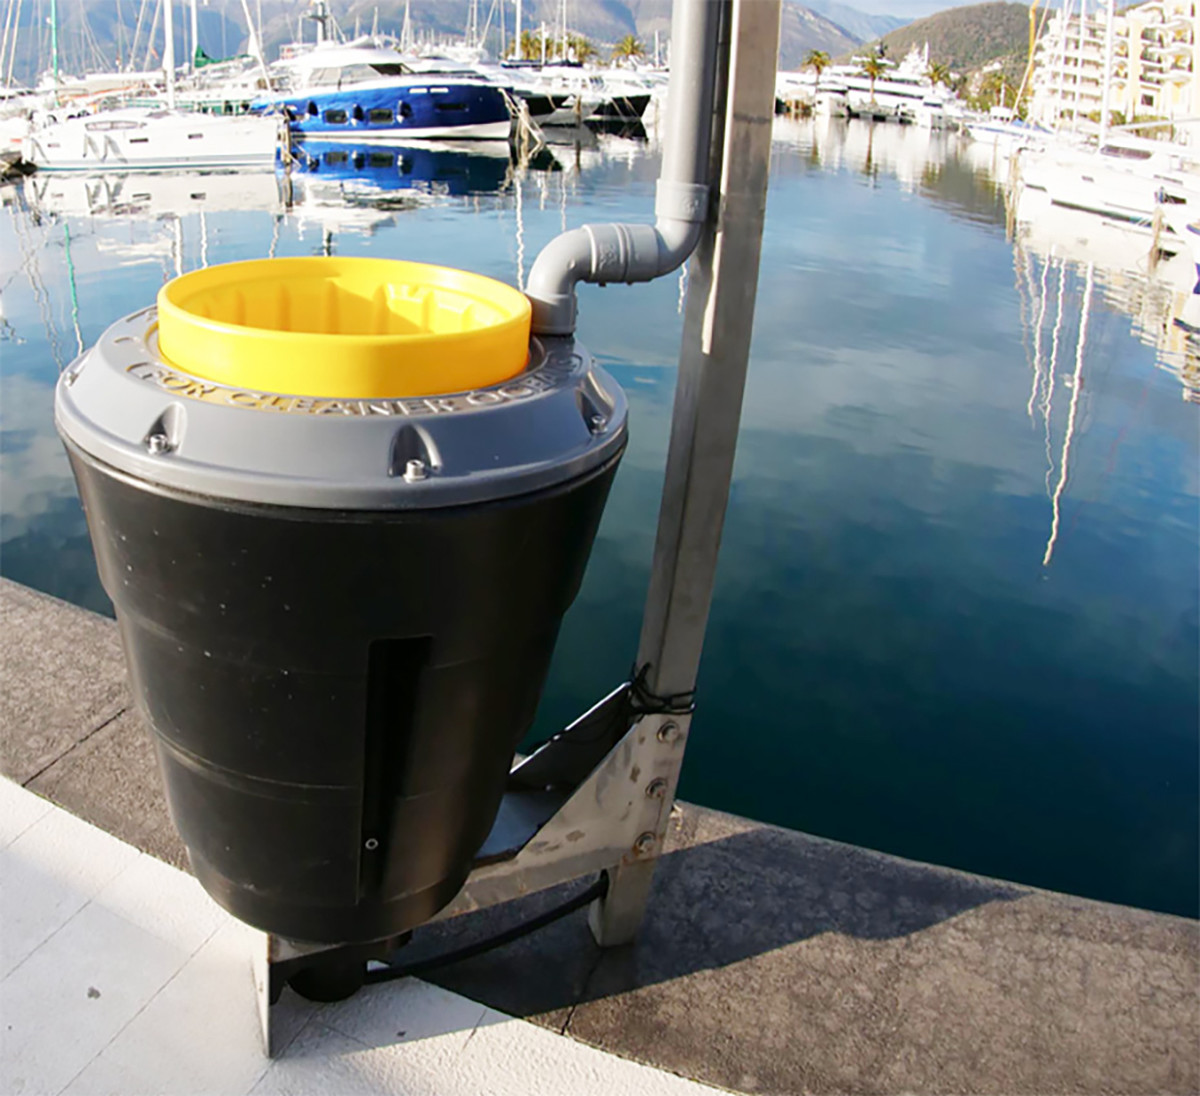 The Seabin resting on a pier; the unit captures waterborne refuse while floating through the water.